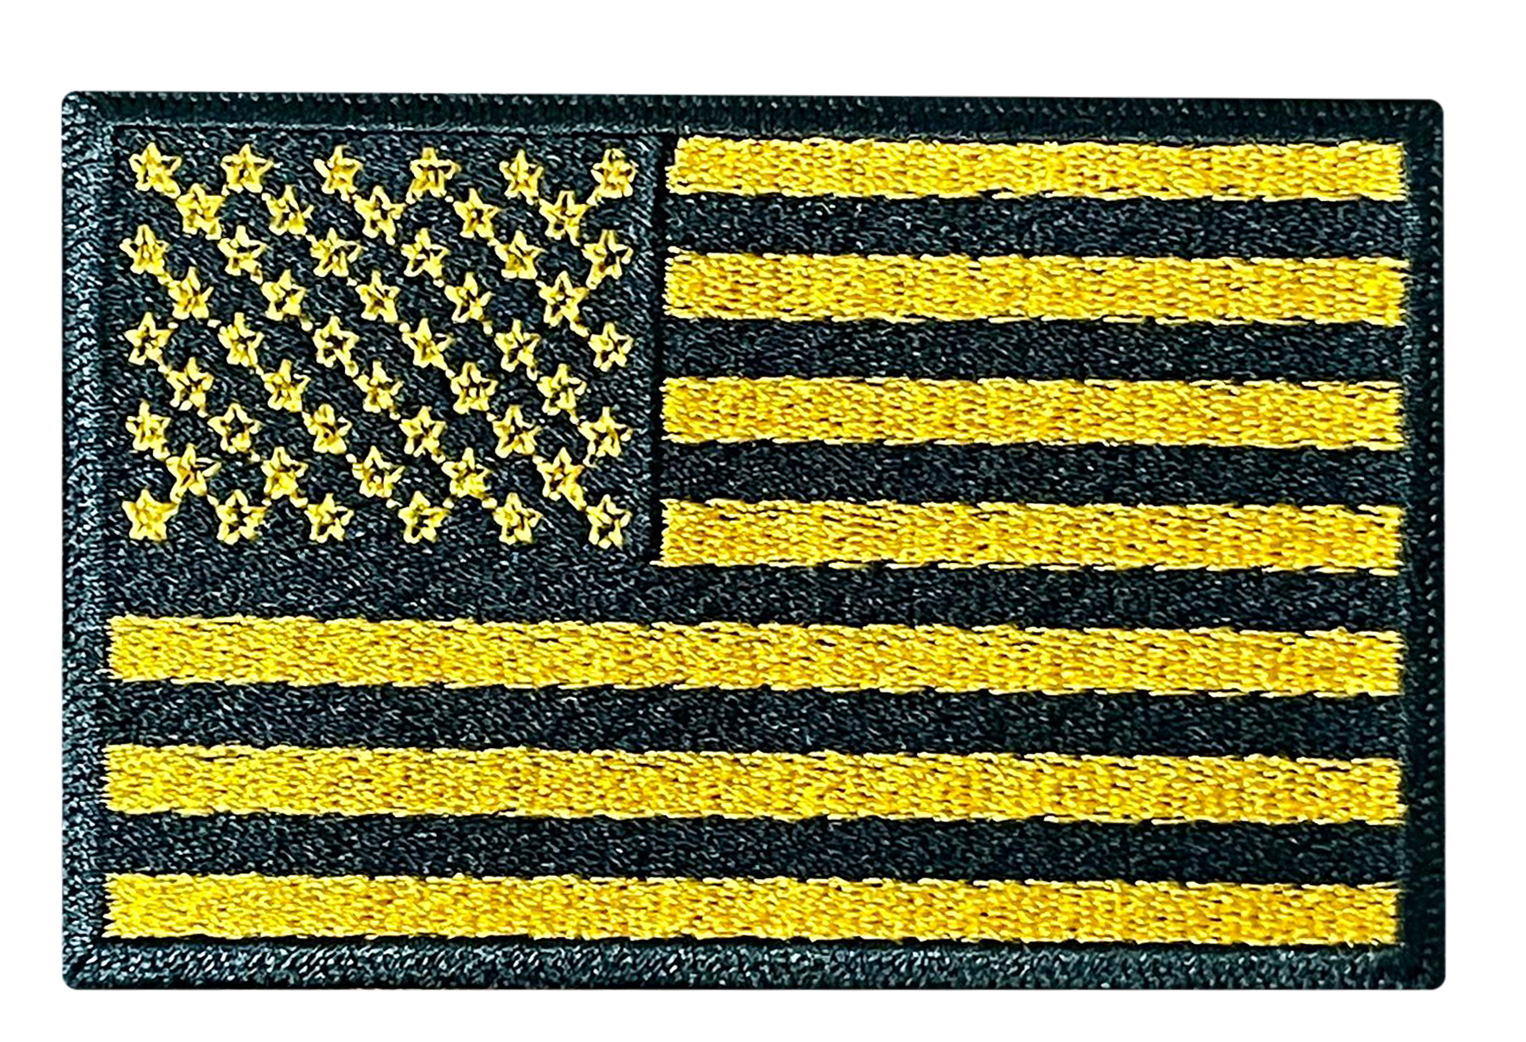 A black and yellow american flag patch on a white background.